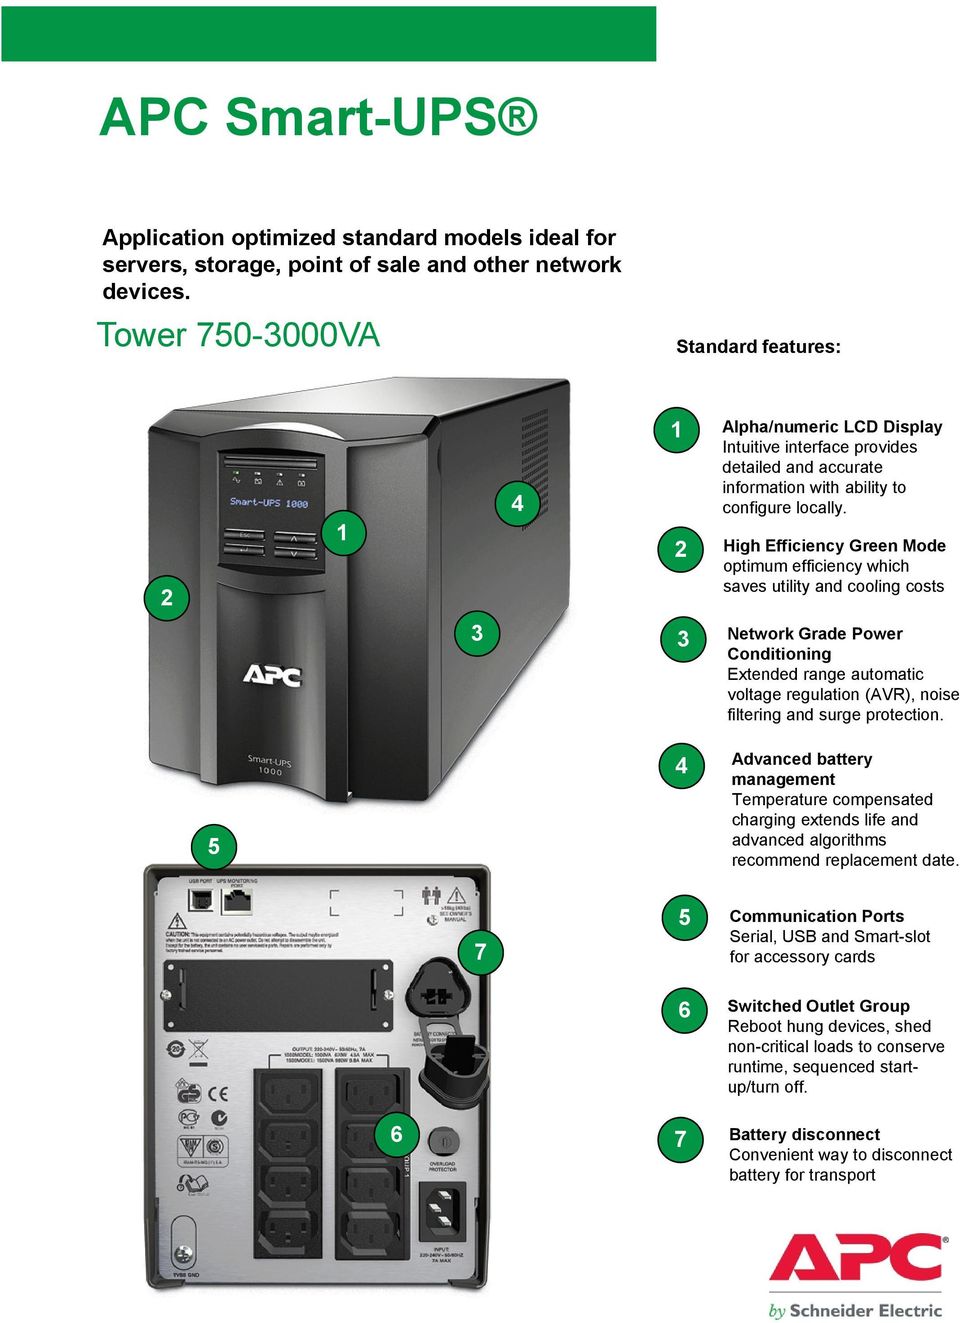 High Efficiency Green Mode optimum efficiency which saves utility and cooling costs Network Grade Power Conditioning Extended range automatic voltage regulation (AVR), noise filtering and surge